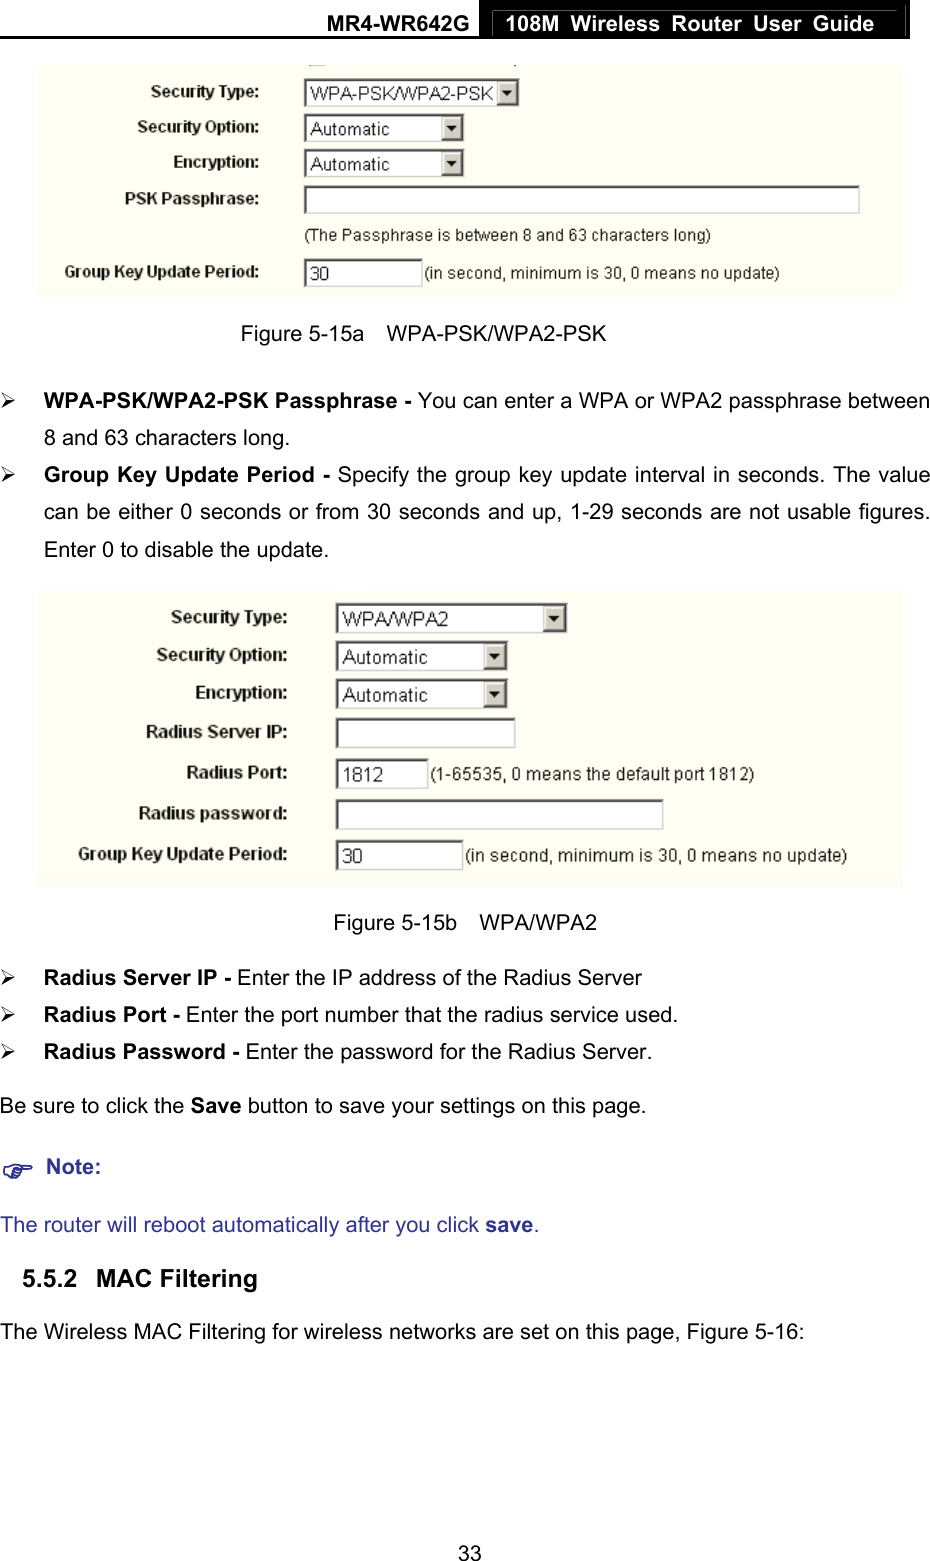 MR4-WR642G 108M Wireless Router User Guide   33 Figure 5-15a  WPA-PSK/WPA2-PSK ¾ WPA-PSK/WPA2-PSK Passphrase - You can enter a WPA or WPA2 passphrase between 8 and 63 characters long. ¾ Group Key Update Period - Specify the group key update interval in seconds. The value can be either 0 seconds or from 30 seconds and up, 1-29 seconds are not usable figures. Enter 0 to disable the update.  Figure 5-15b  WPA/WPA2 ¾ Radius Server IP - Enter the IP address of the Radius Server ¾ Radius Port - Enter the port number that the radius service used. ¾ Radius Password - Enter the password for the Radius Server. Be sure to click the Save button to save your settings on this page. ) Note: The router will reboot automatically after you click save. 5.5.2  MAC Filtering   The Wireless MAC Filtering for wireless networks are set on this page, Figure 5-16: 